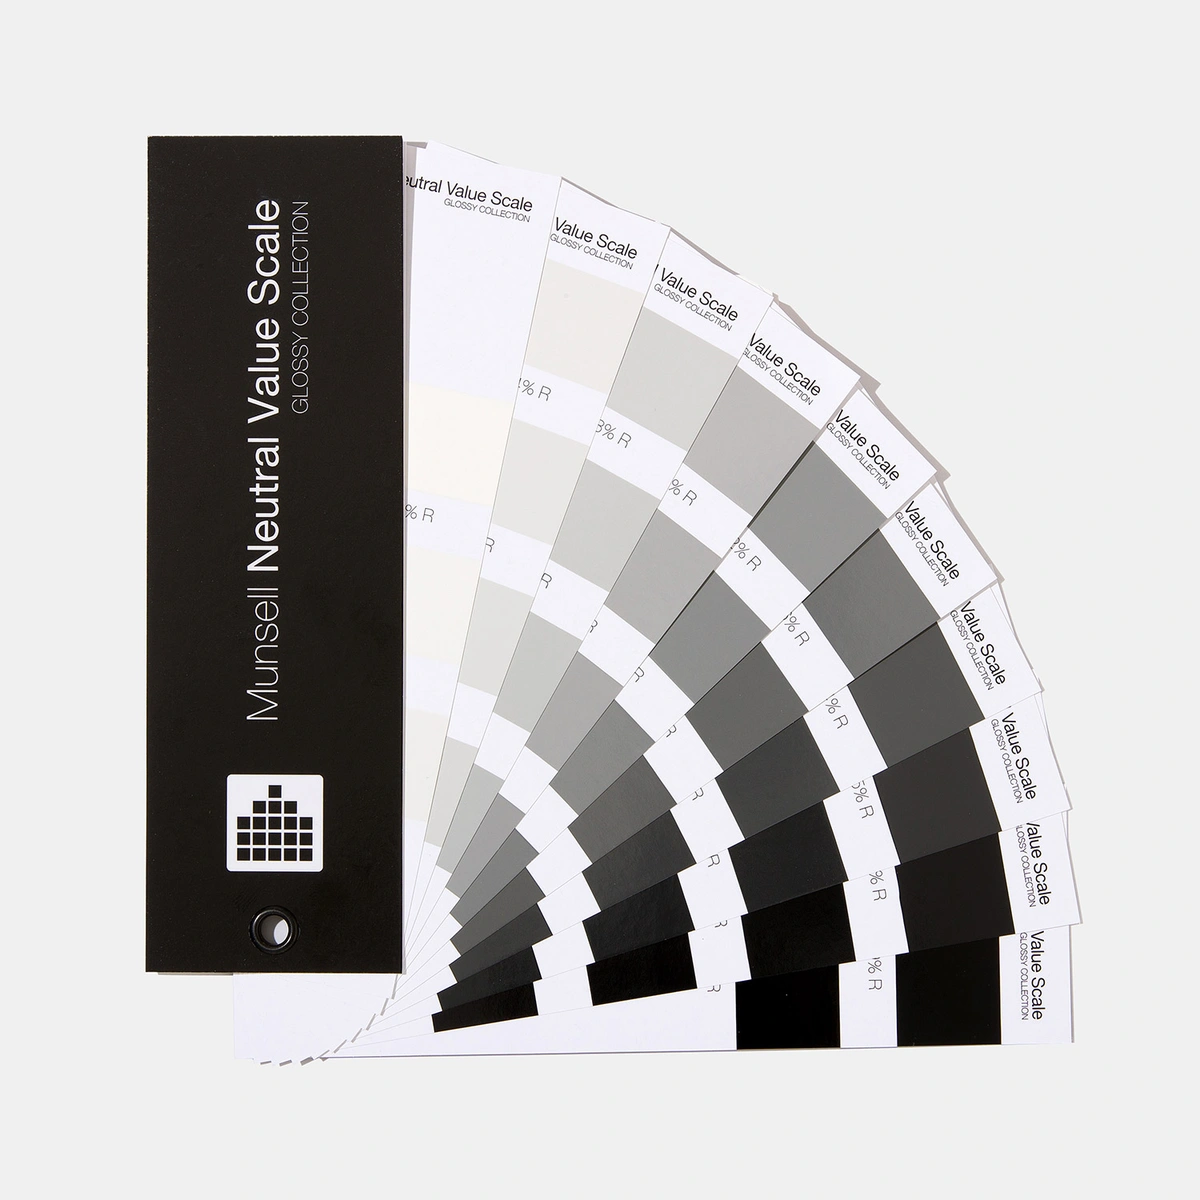 pantone-munsell-neutral-value-scale-glossy_1